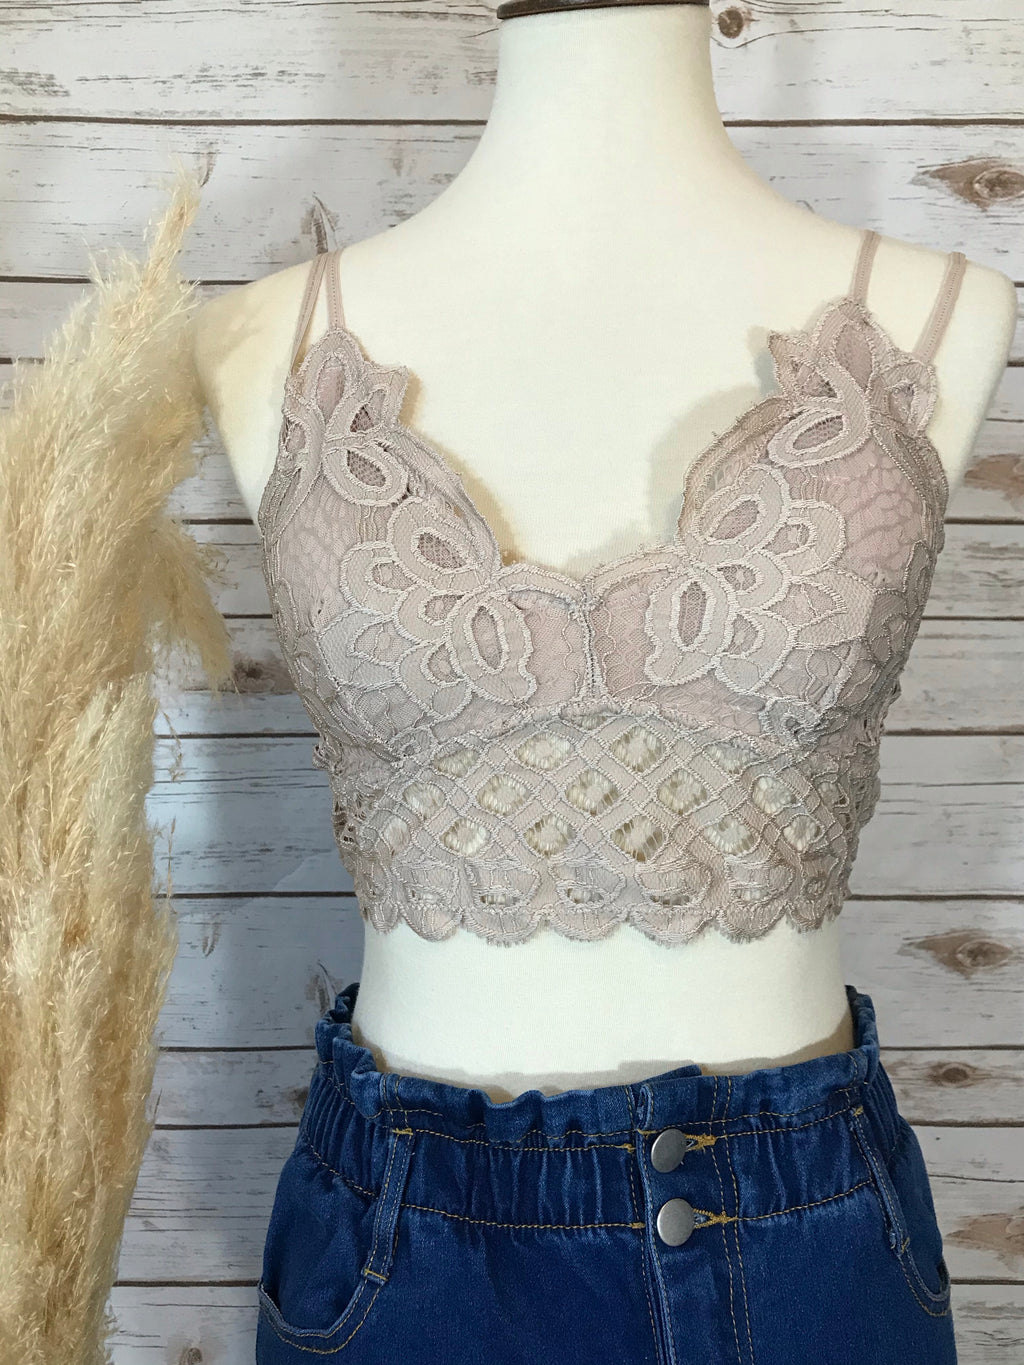 Give Me All the Romance Light Taupe Bralette - Elizabeth's Boutique 